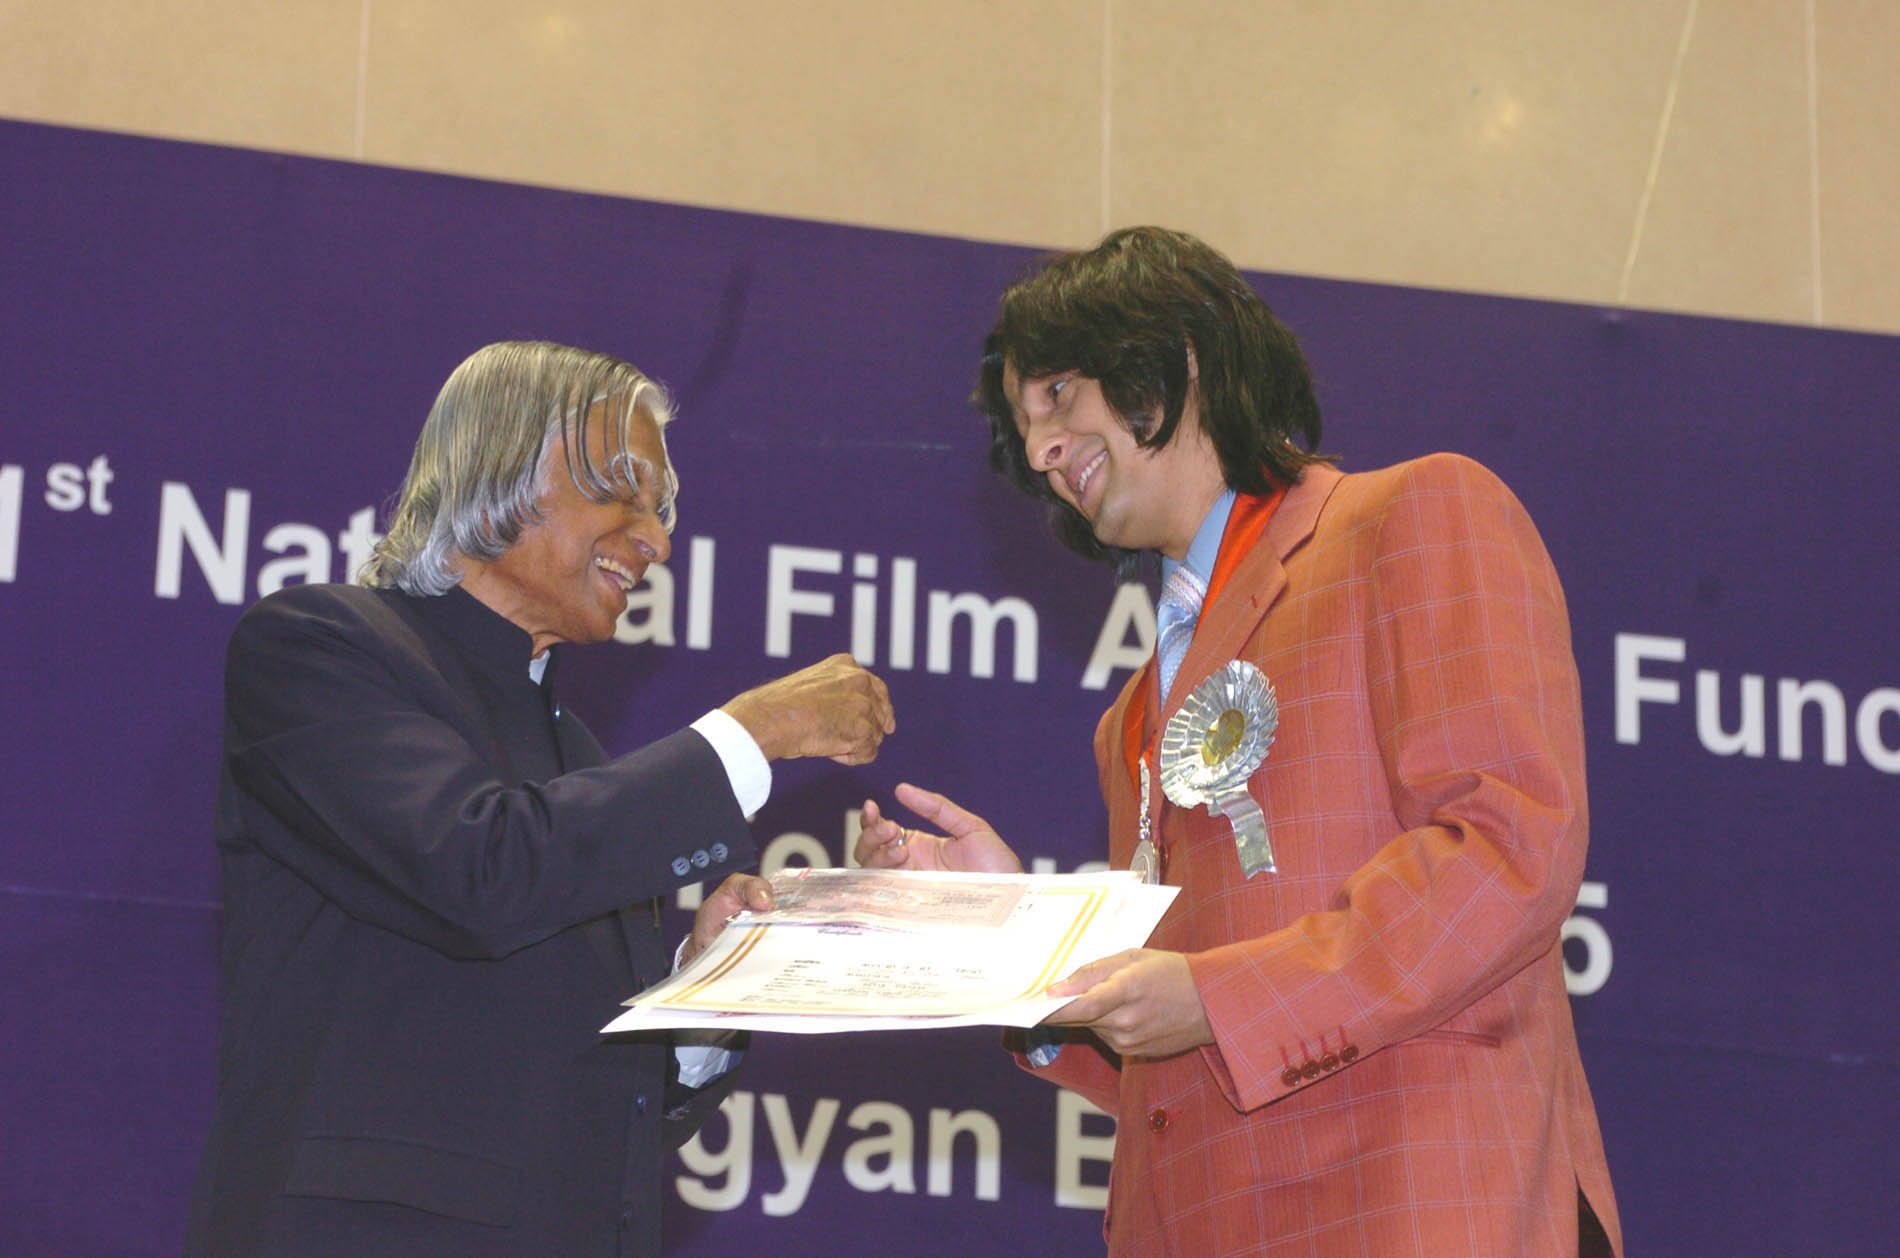 The President Dr. A.P.J. Abdul Kalam presenting the Best Male Playback Singer Award for the year 2004 to Shri Sonu Nigam at the 51st National Film Award function in New Delhi on February 2 2005